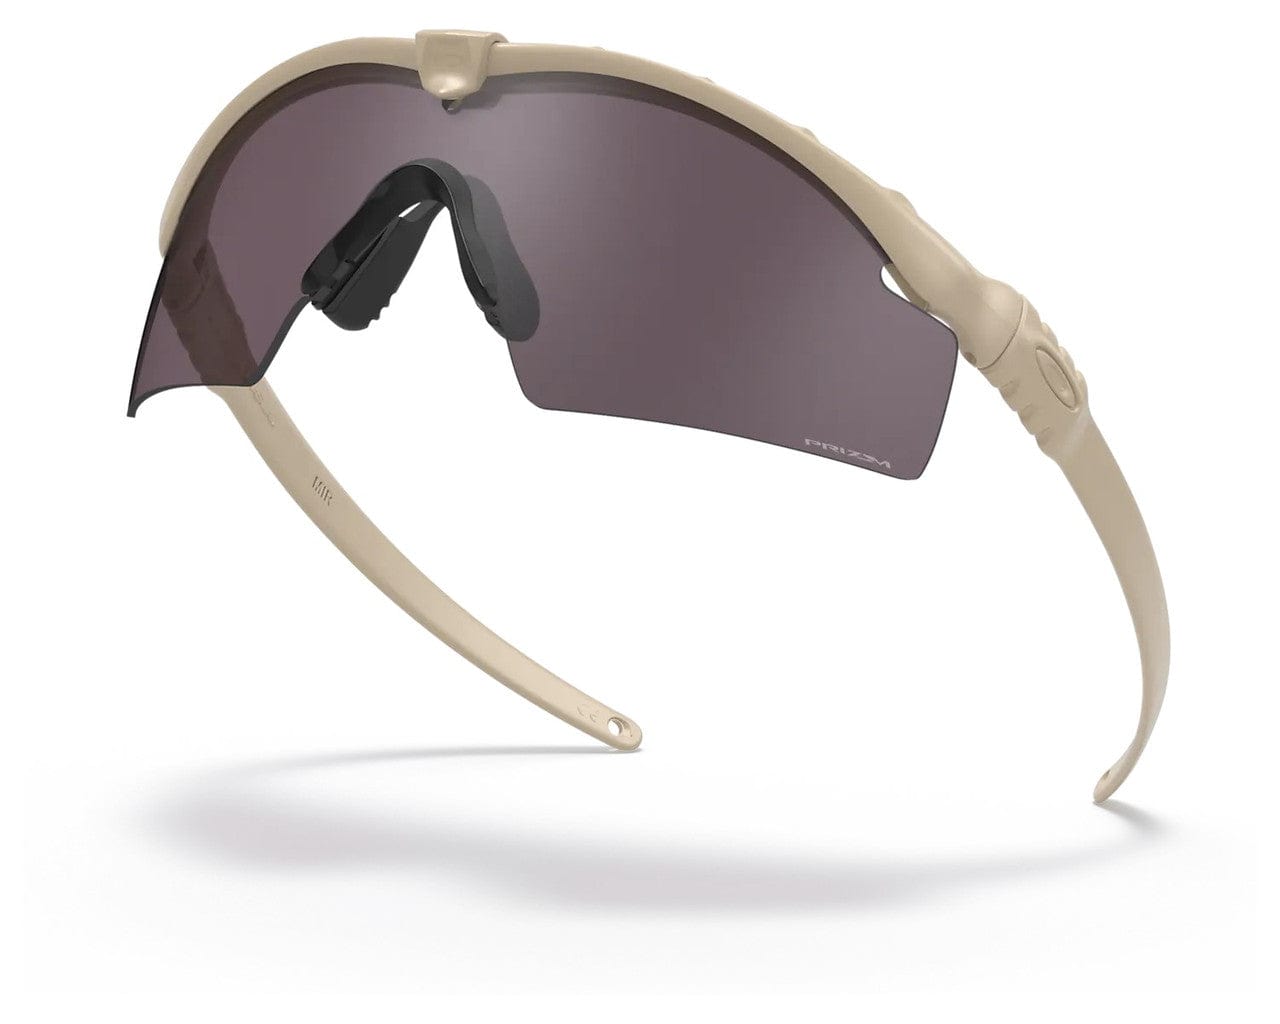 Oakley SI Ballistic M Frame 3.0 with Bone Frame and Prizm Grey Lens OO9146-3432 Profile View